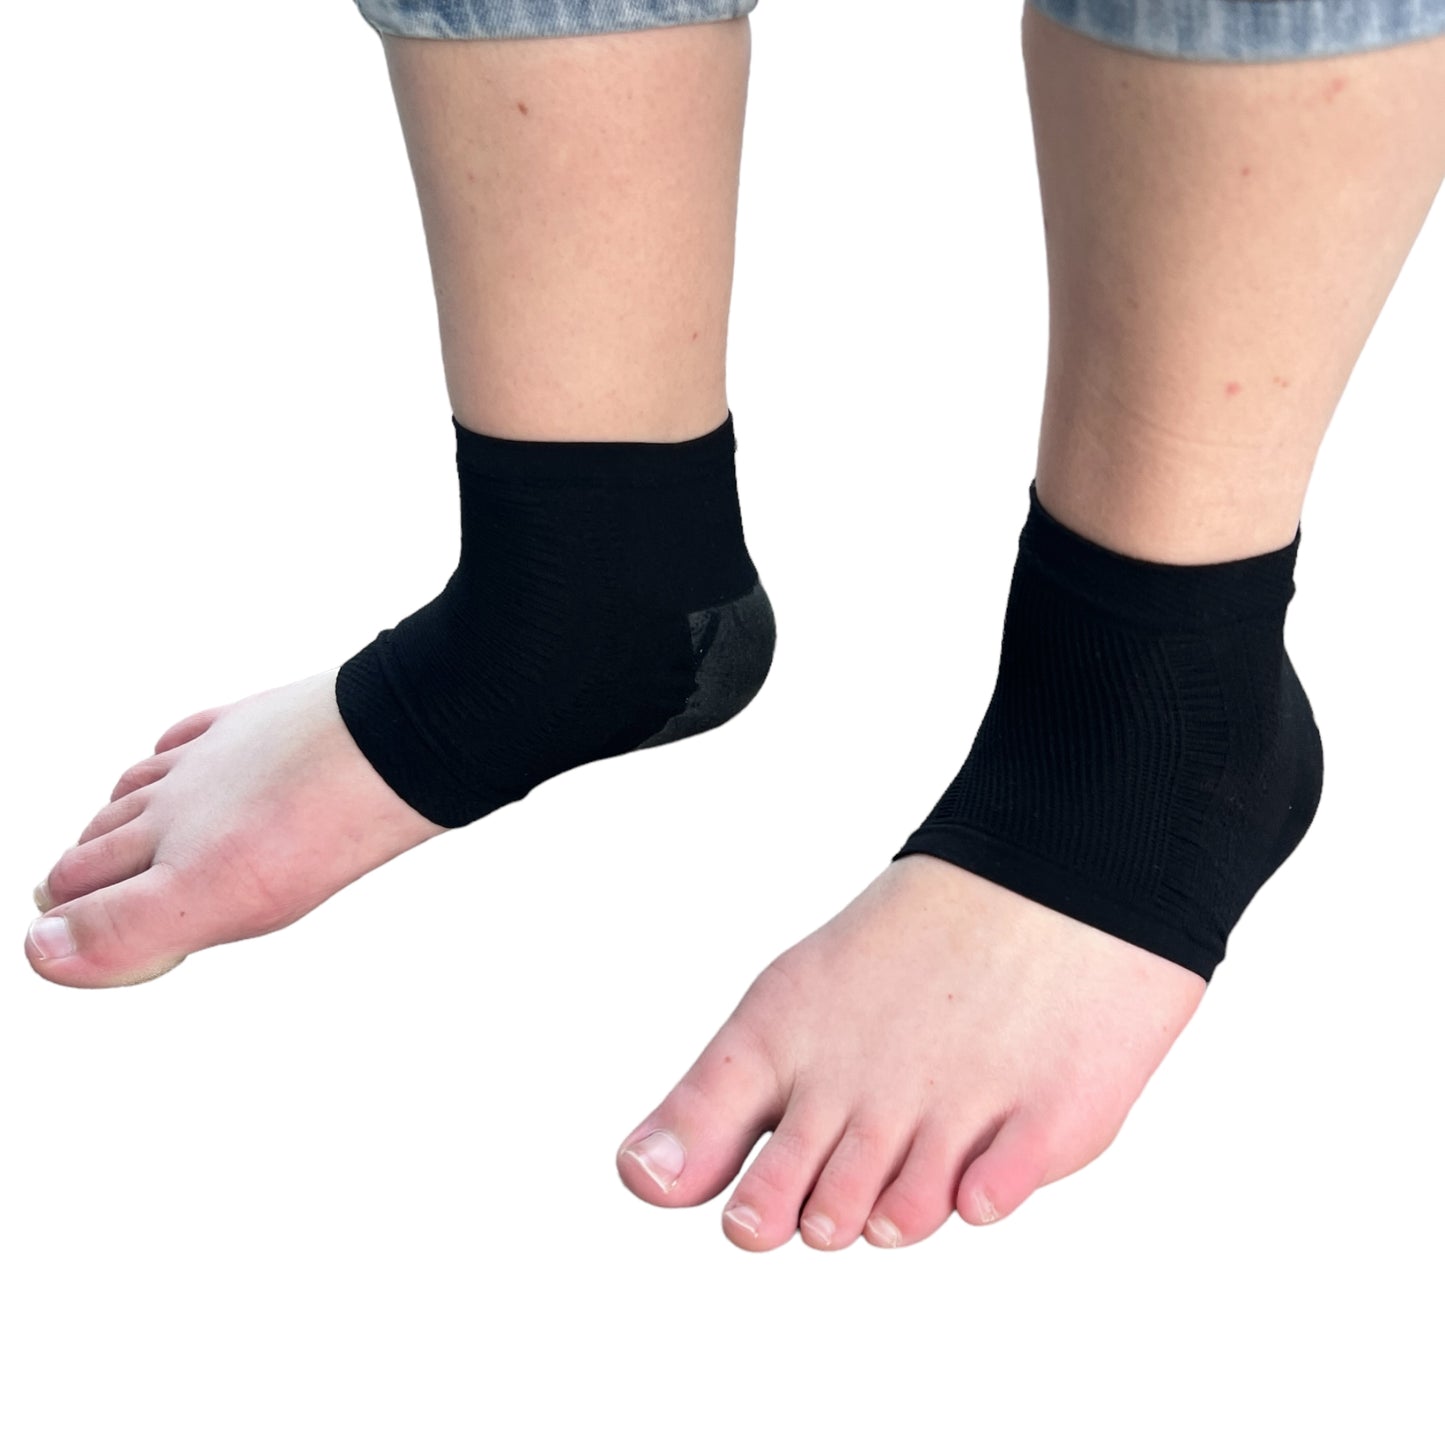 Rouched Gel Stocking Socks